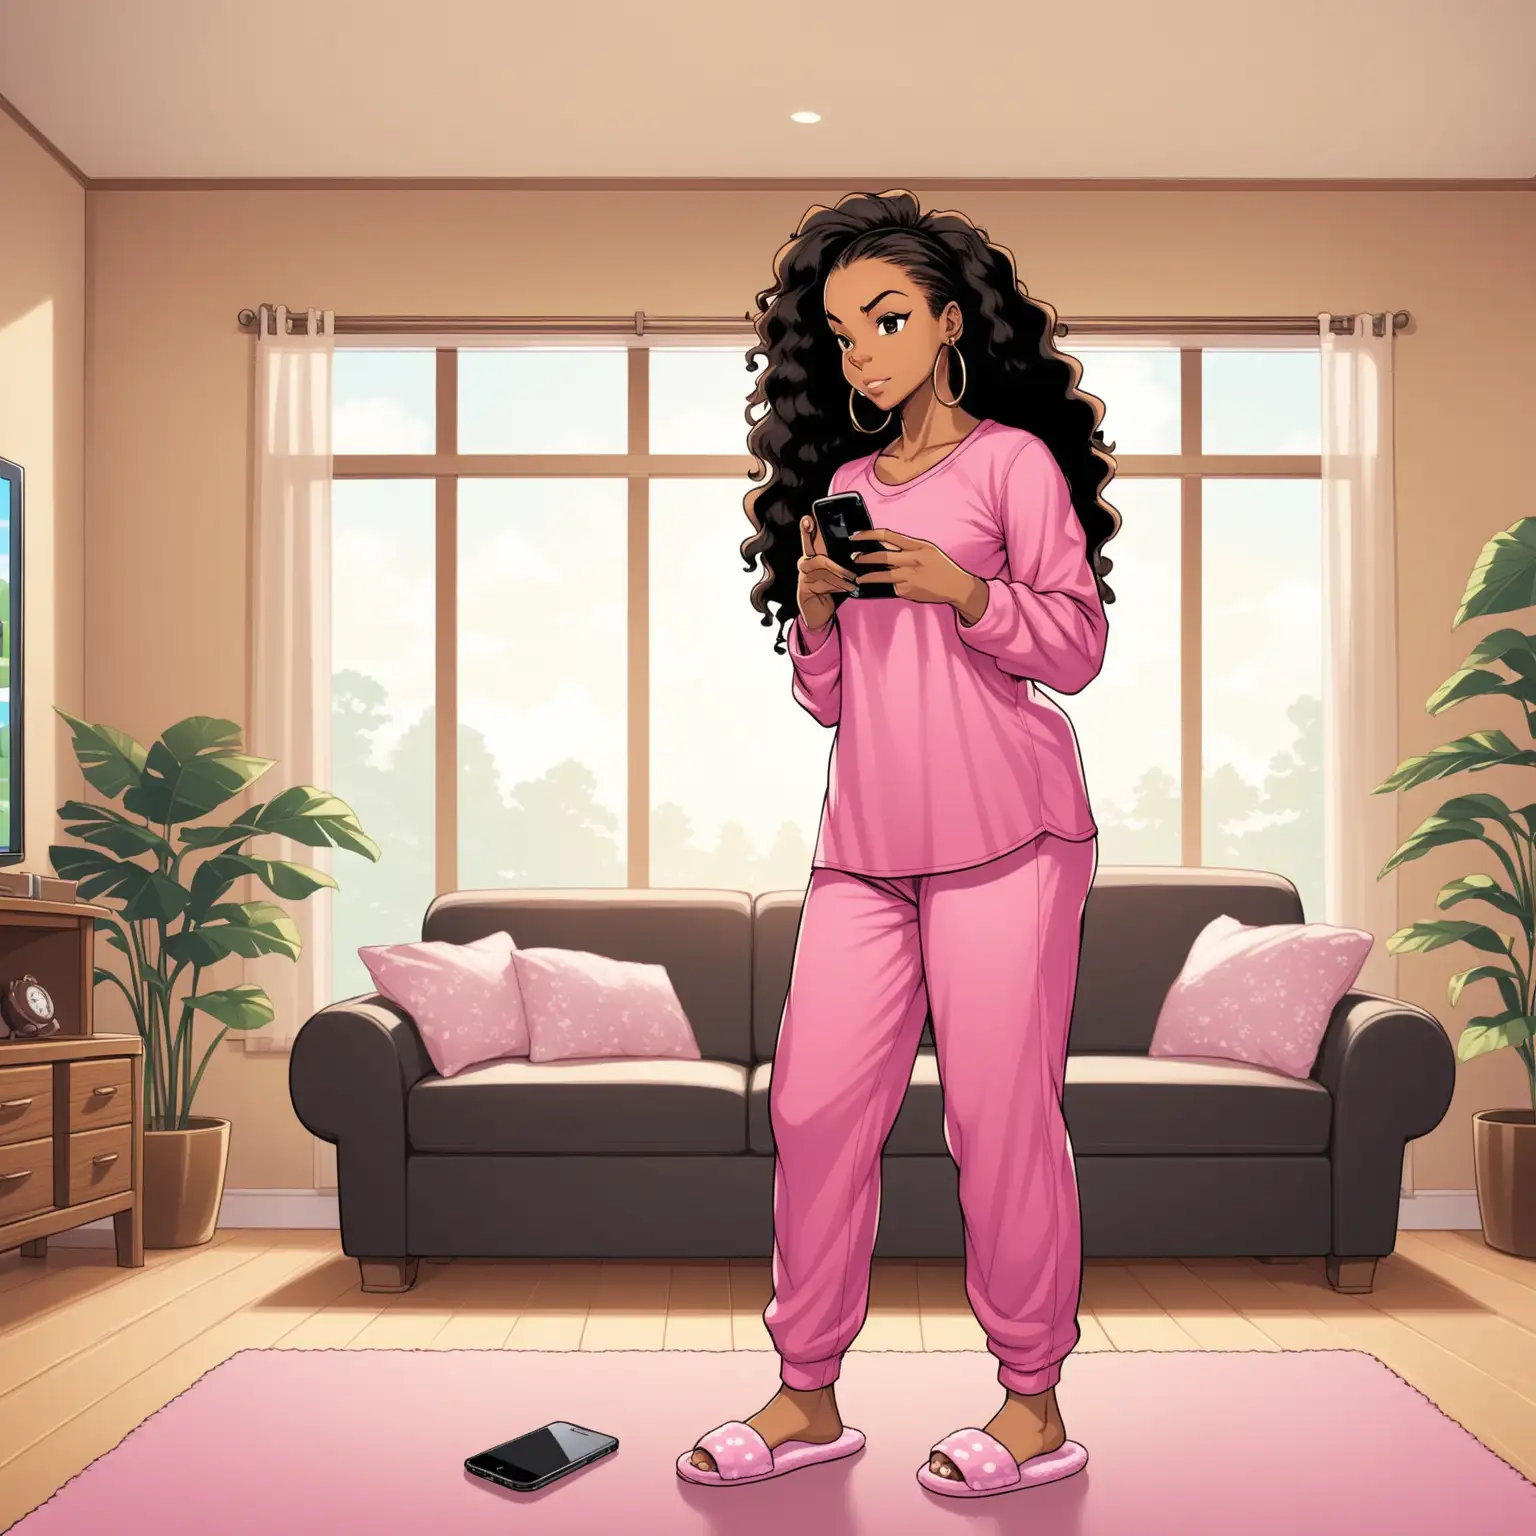 create the boondocks cartoon styled character, hourglass athletic figured african american woman with long black messy hair, pink pajamas with house slippers, in the living room backgorund, looking at her iphone